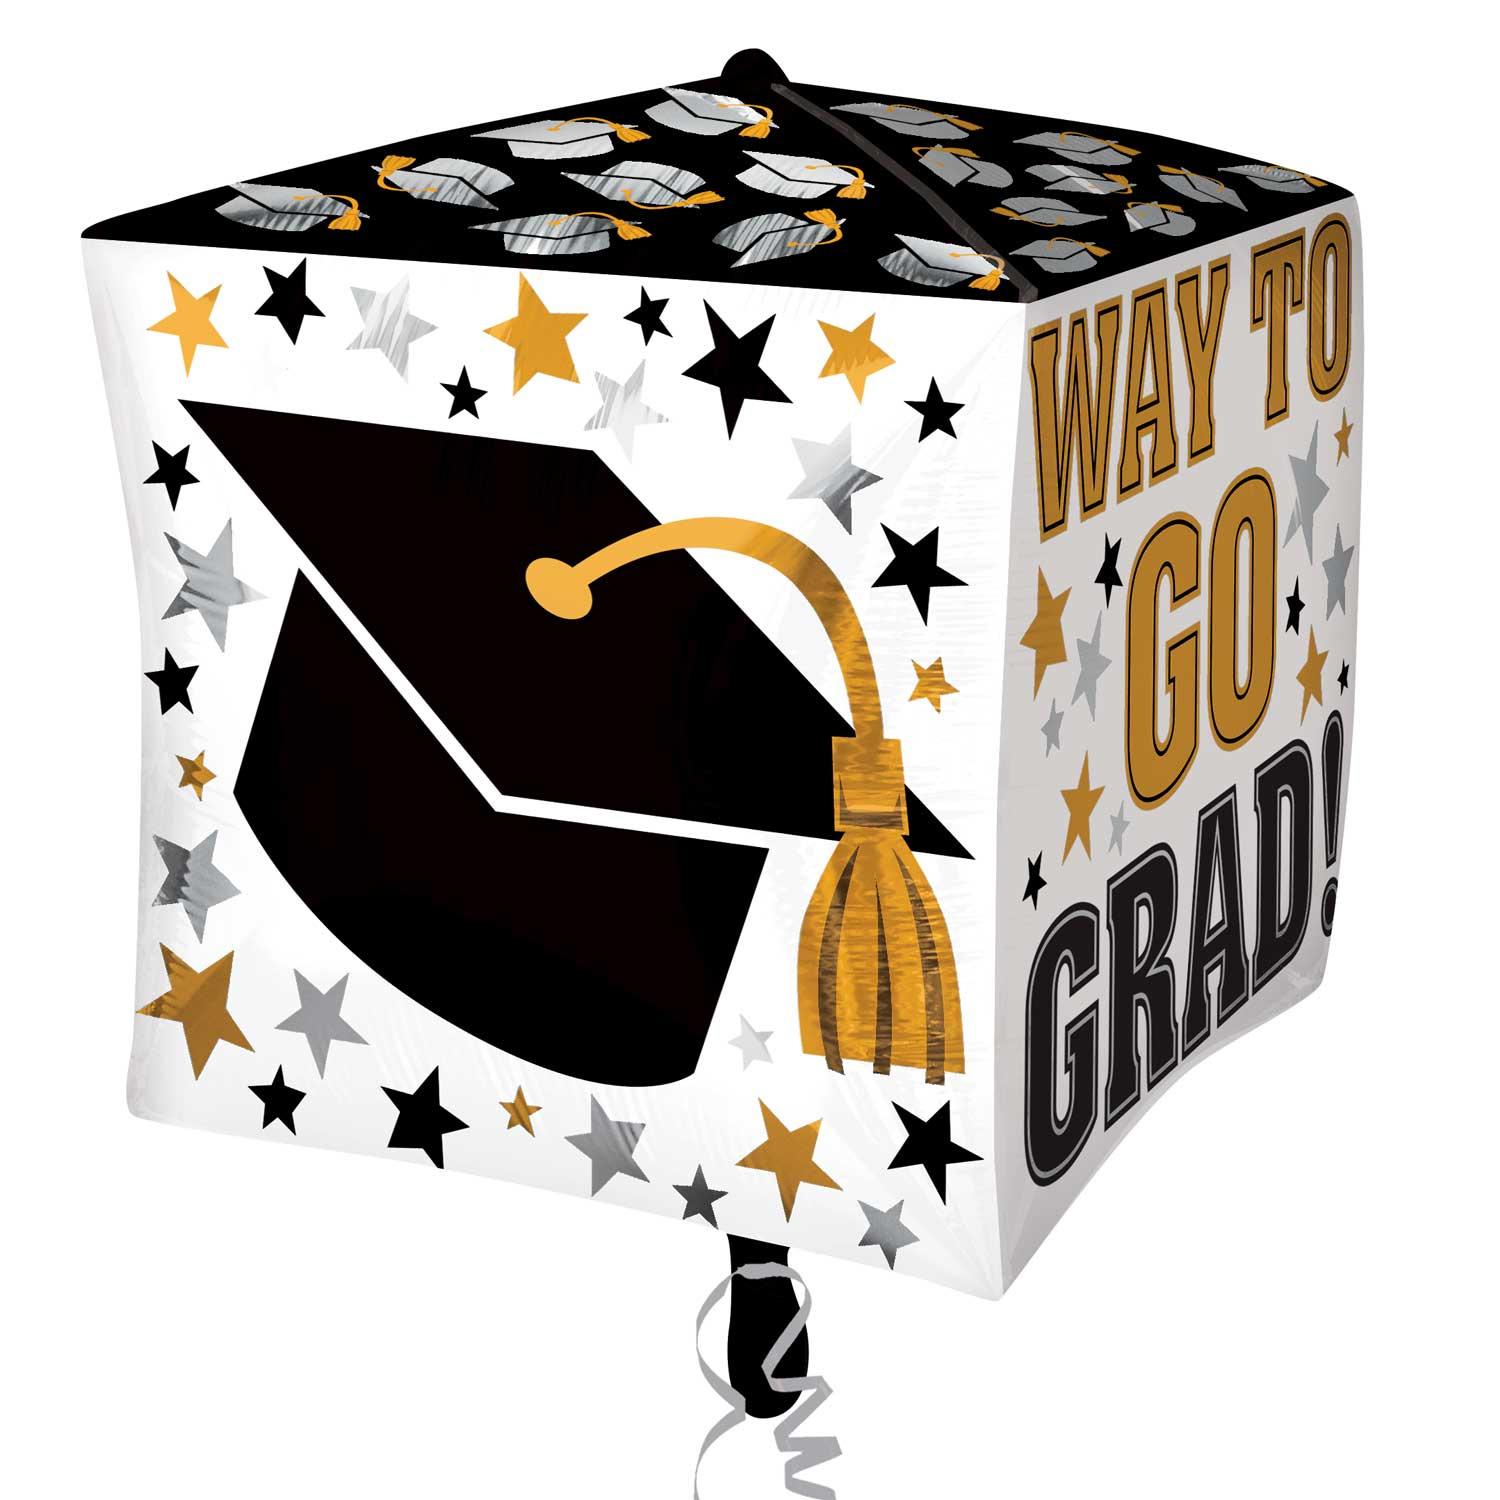 Way to Go Grad Gold & Black UltraShape Foil Balloon 15in Balloons & Streamers - Party Centre - Party Centre